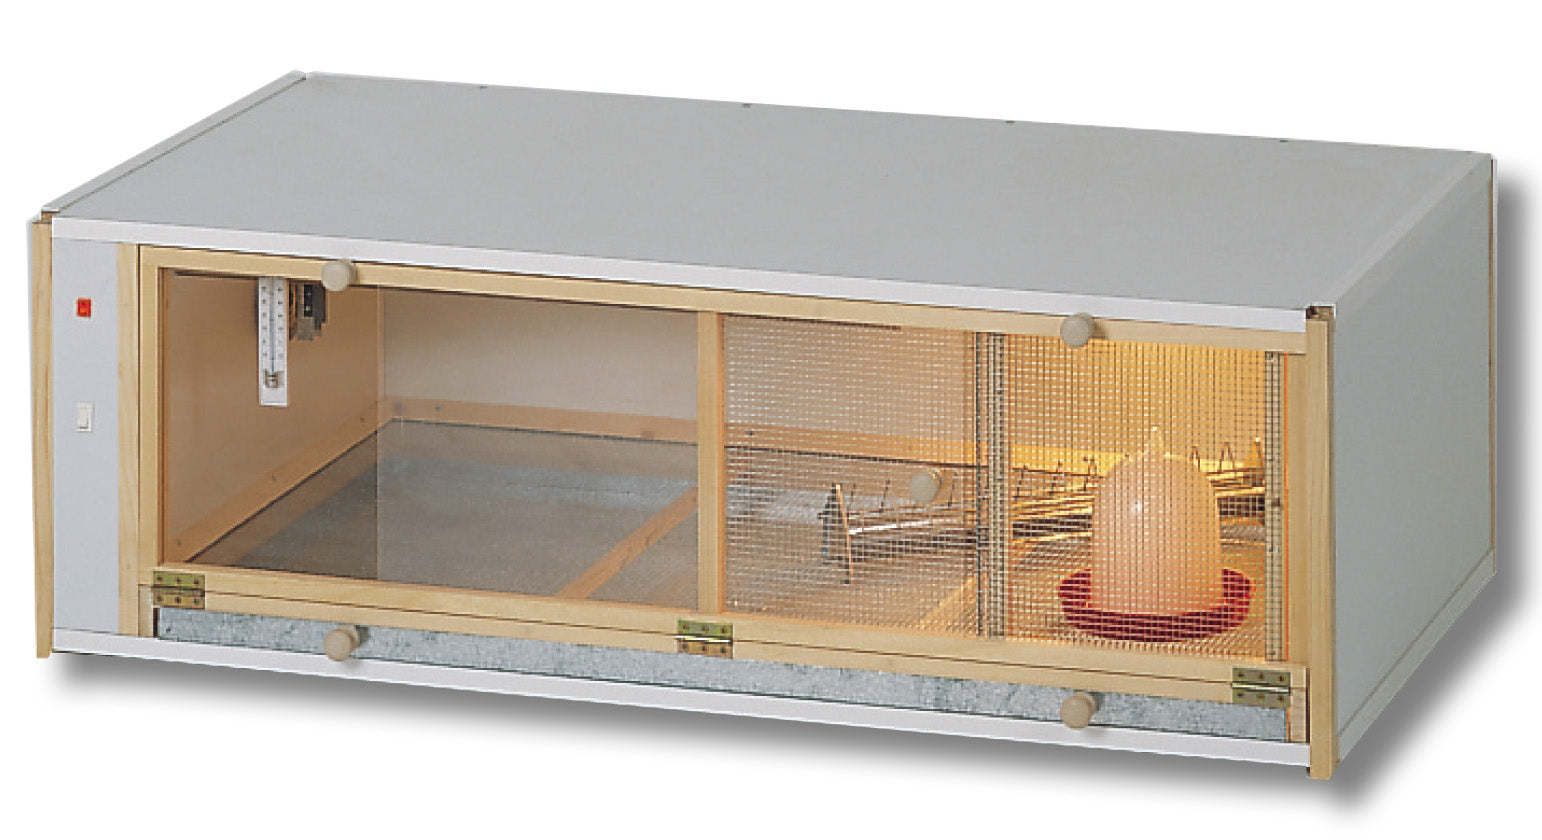 Wooden Brooder Box for up to 80-90 chicks, 122x60x39cm